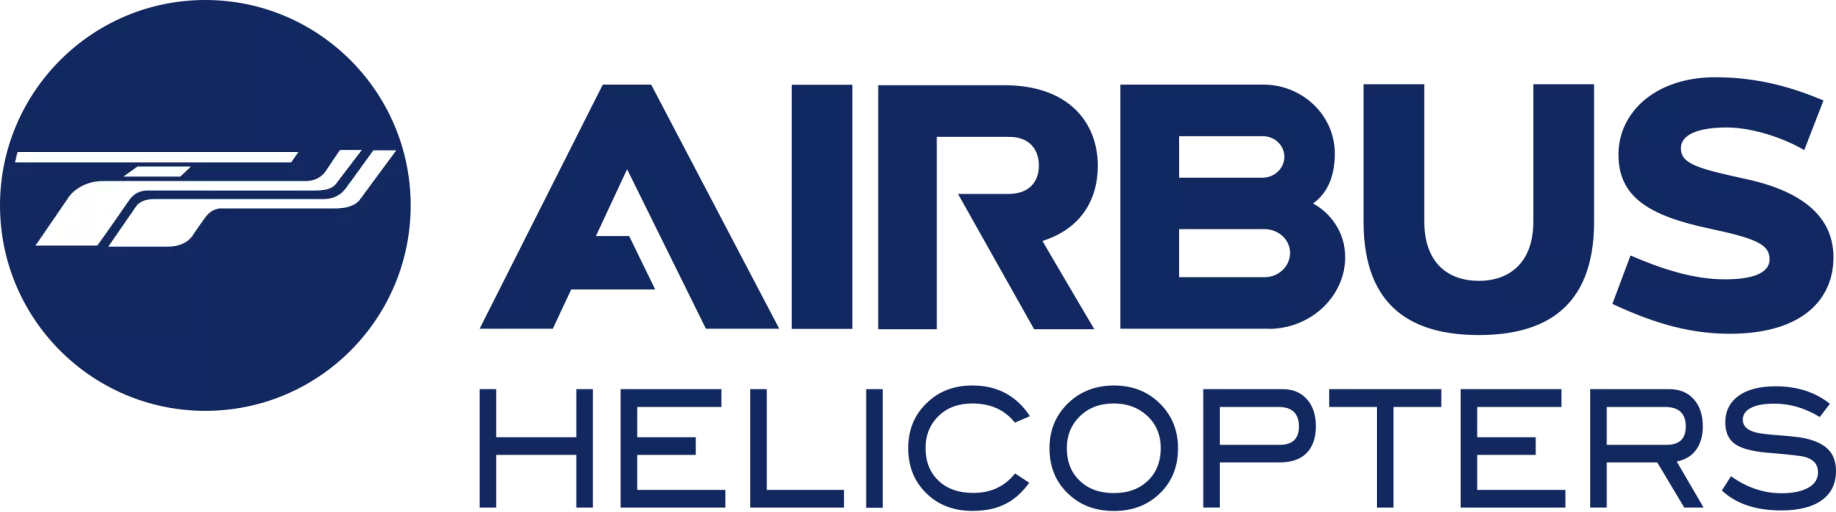 Logo firmy Airbus Helicopters.